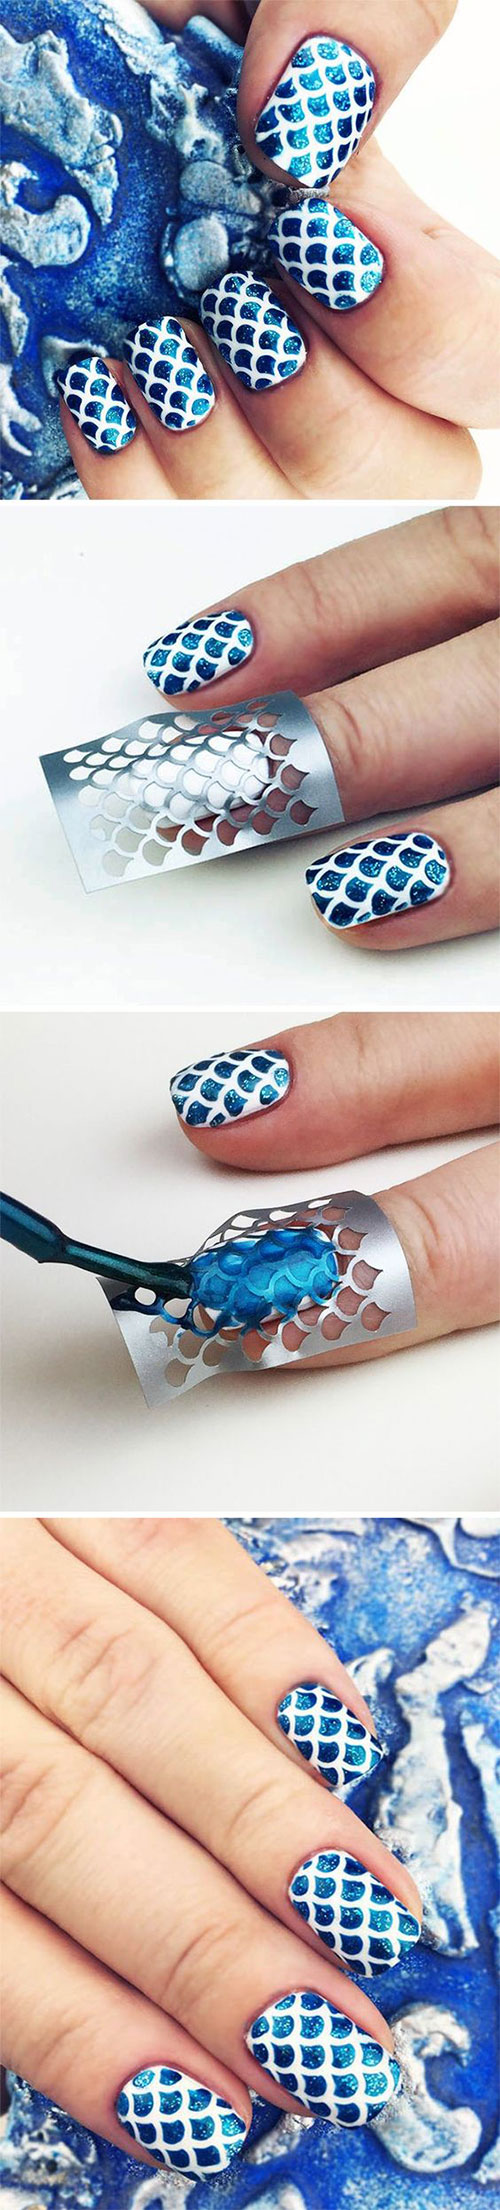 20-Easy-Step-By-Step-Summer-Nail-Art-Tutorials-For-Beginners-2016-12